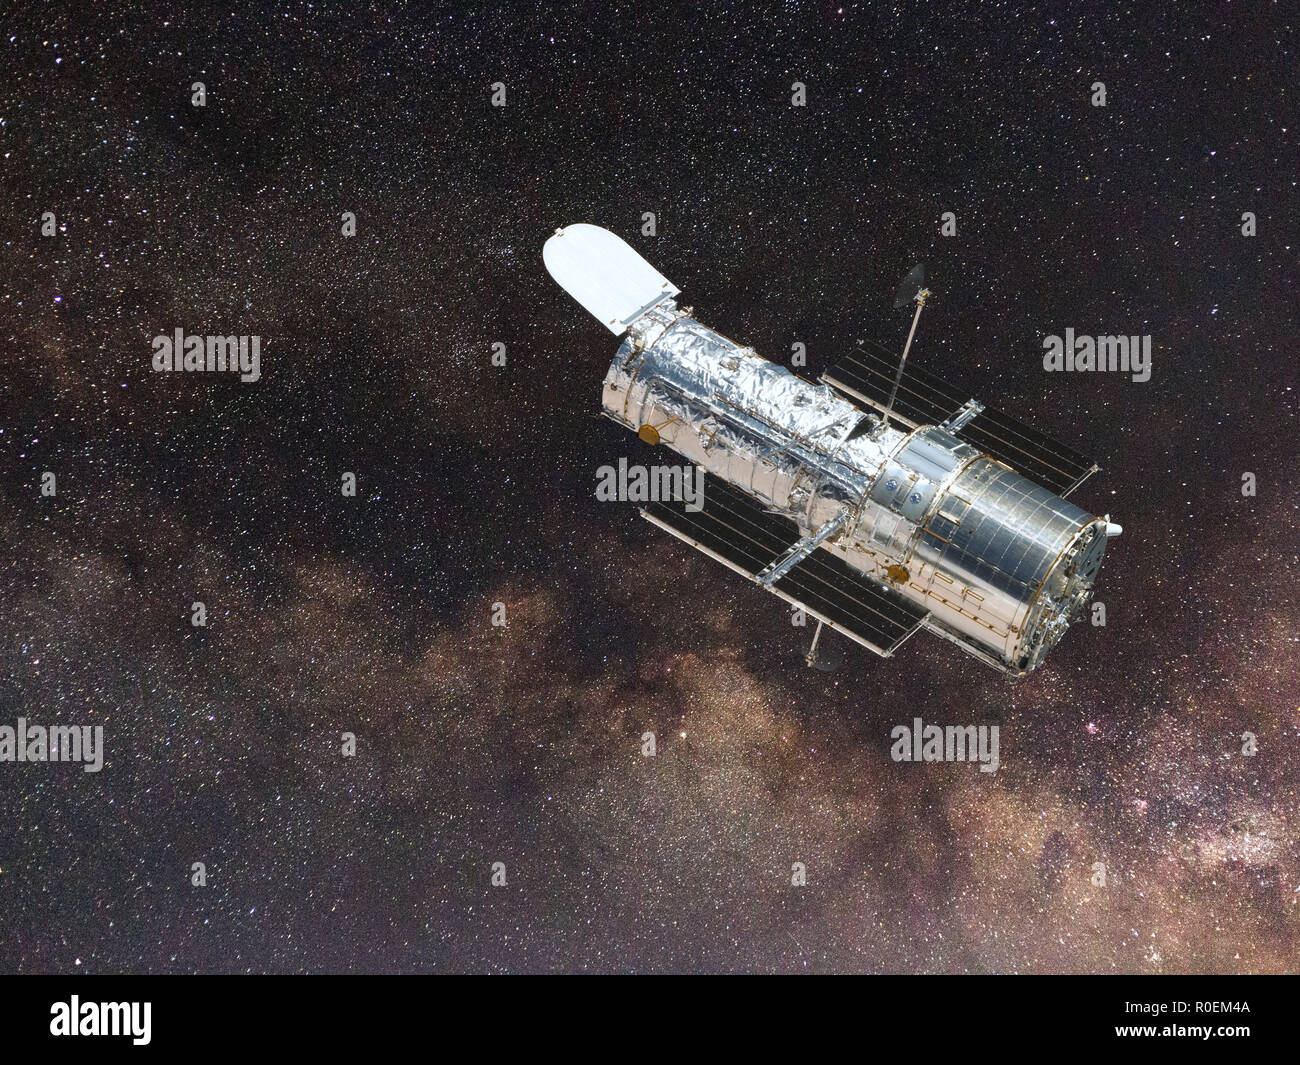 Hubble Space Telescope observing a star field Stock Photo